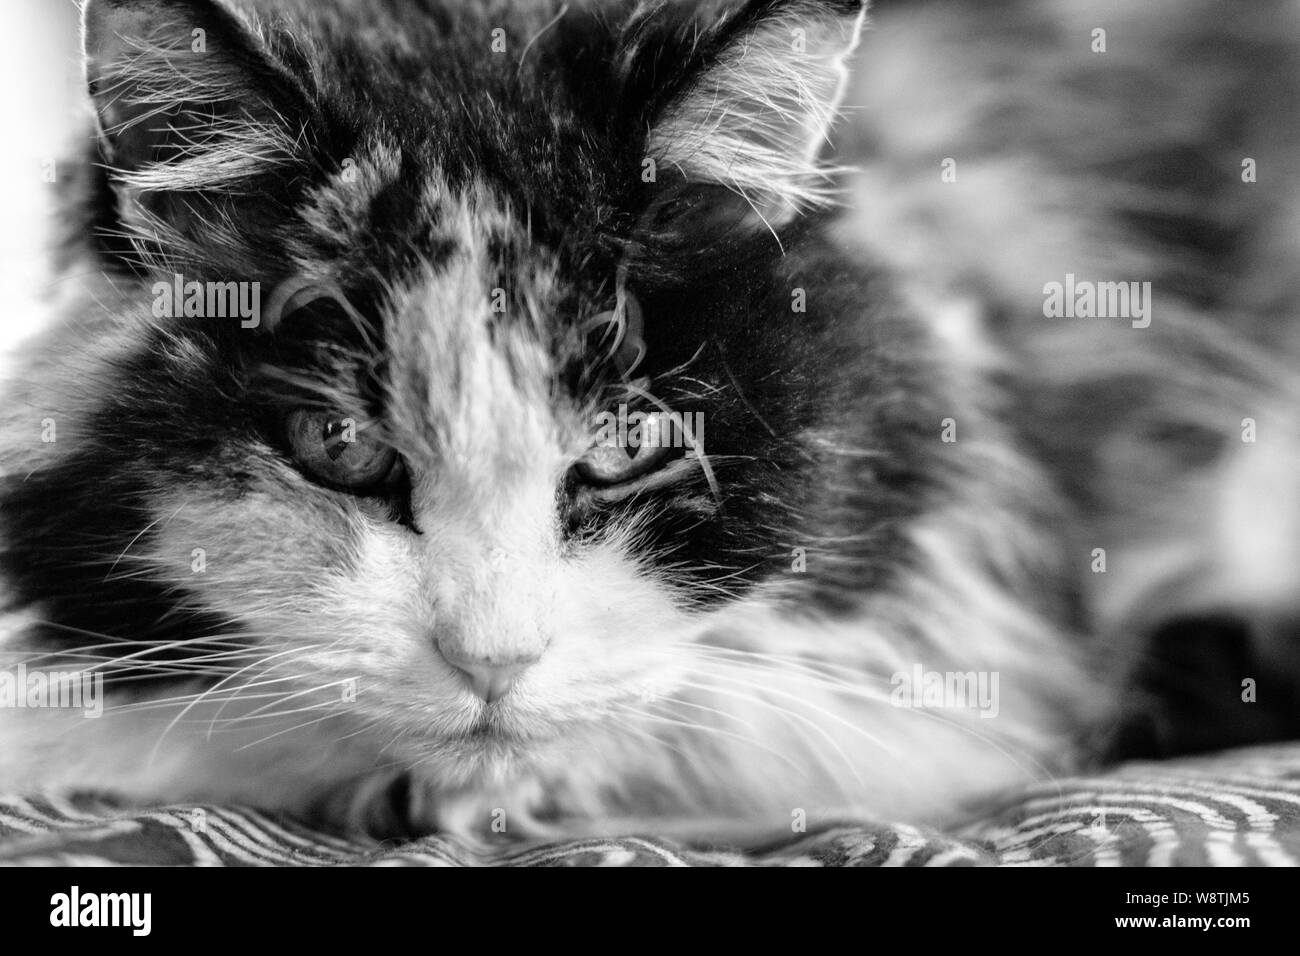 Close-up of a long-haired, calico cat (Felis catus) Stock Photo